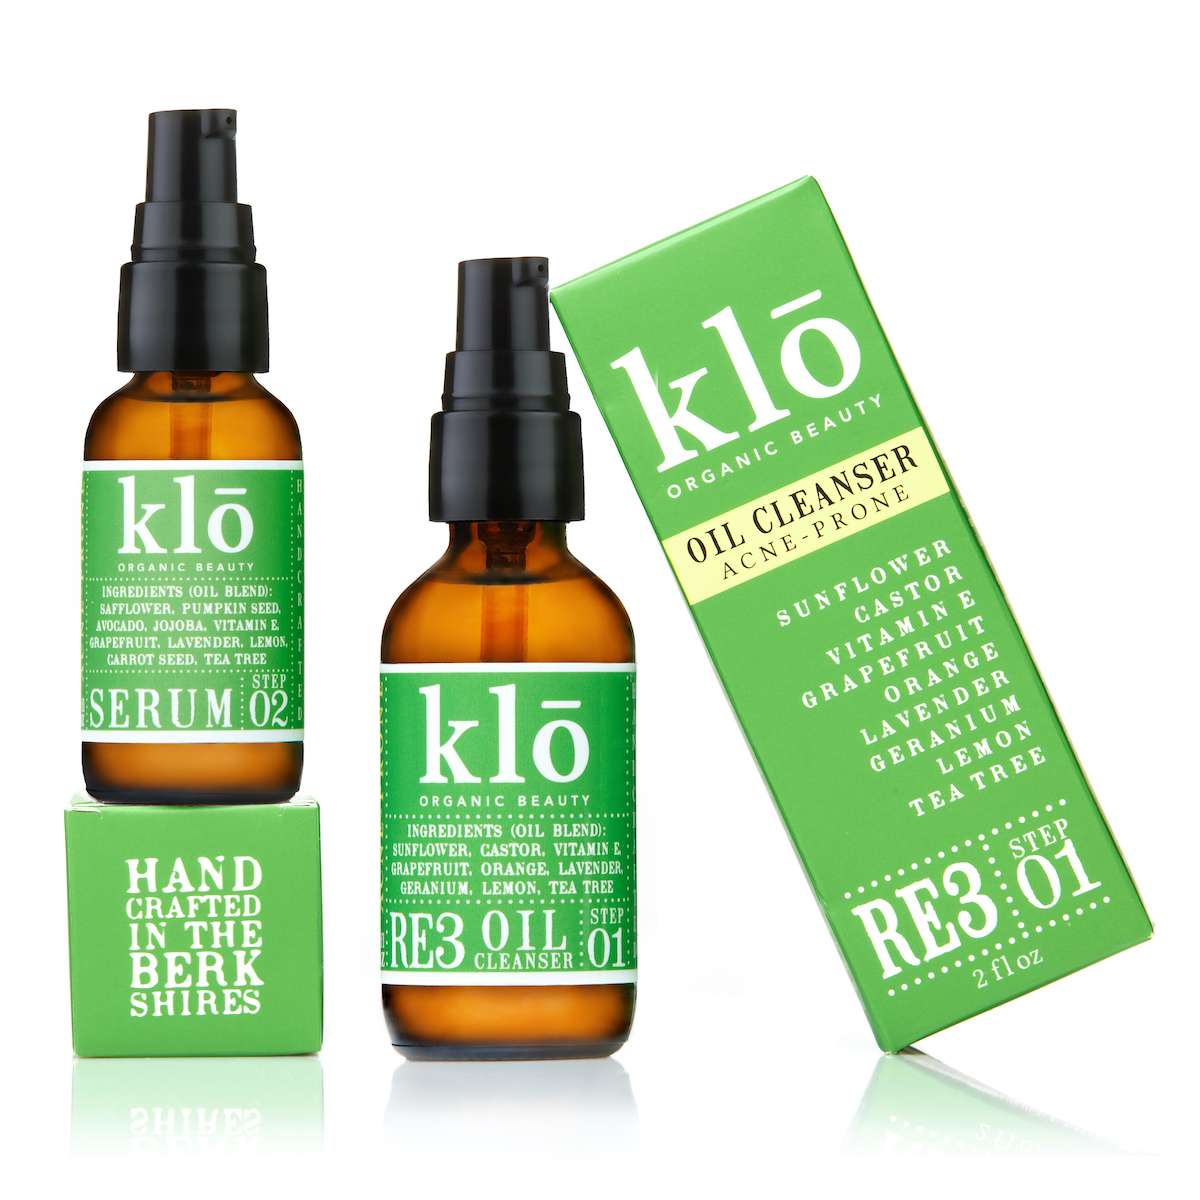 Klo Organic Beauty RE3 oil cleanser and serum for acne-prone skin bottles and tilted box.